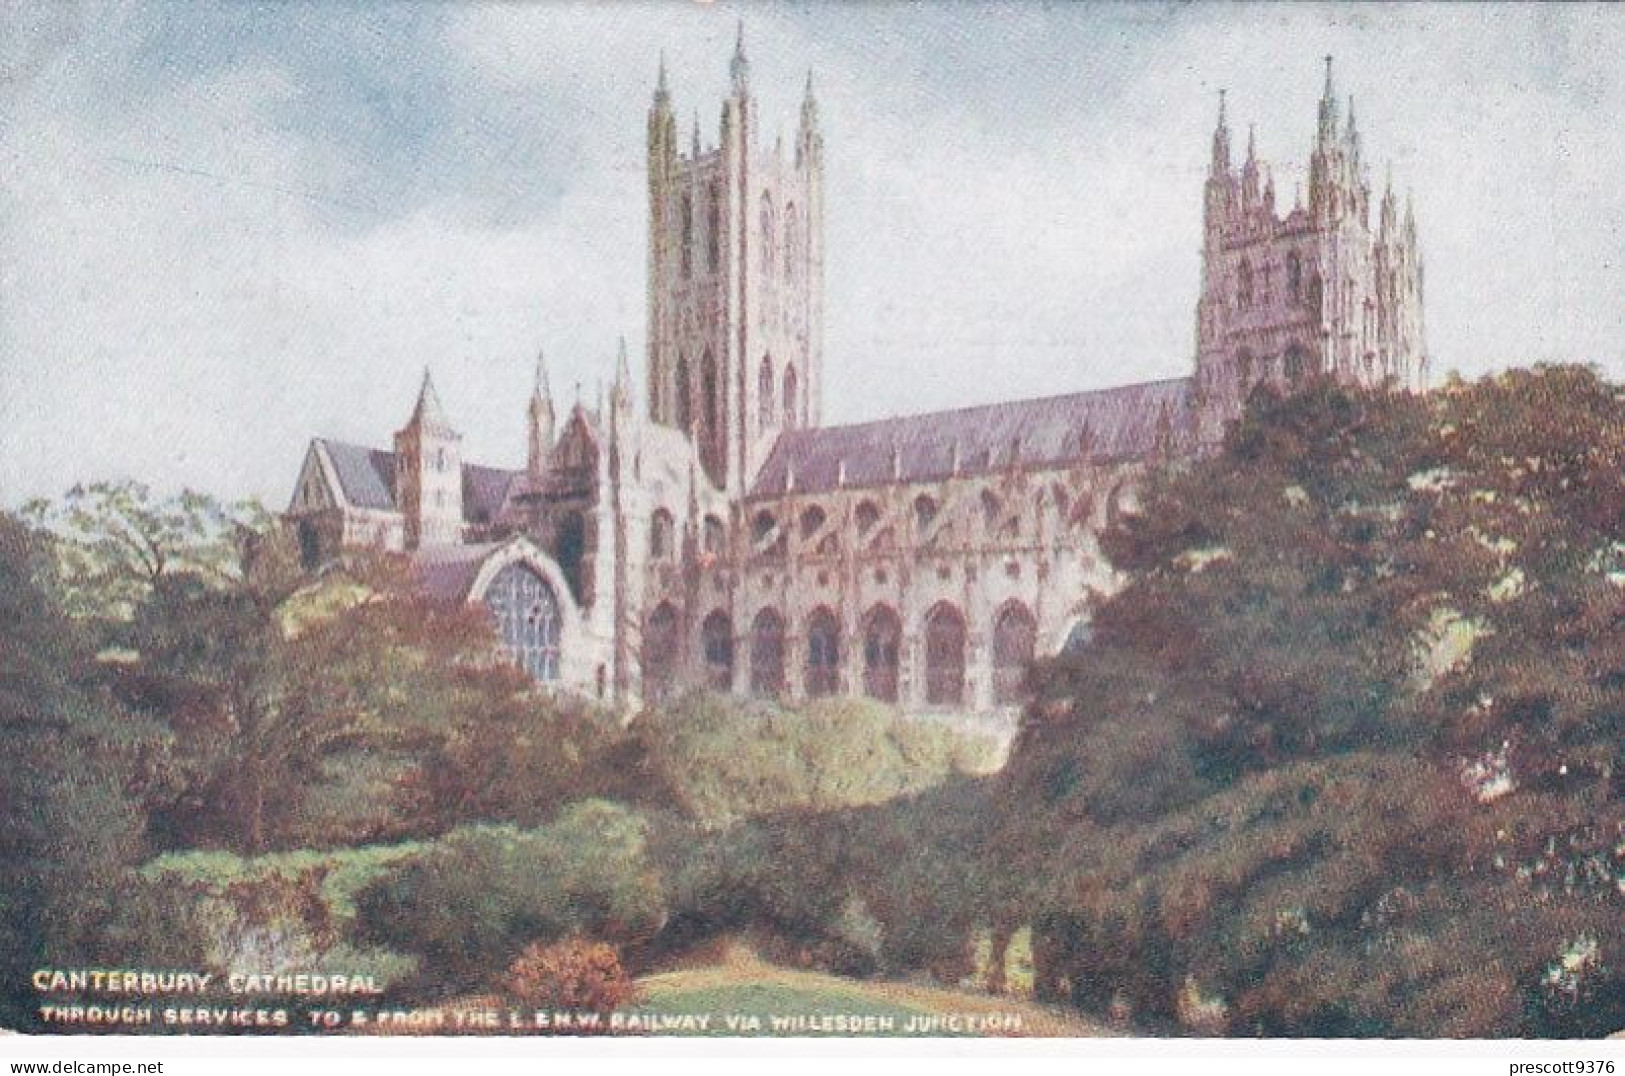 Canterbury  Cathedral, From L&NW Railway - Kent, UK   -   Unused Postcard   - K2 - Rochester